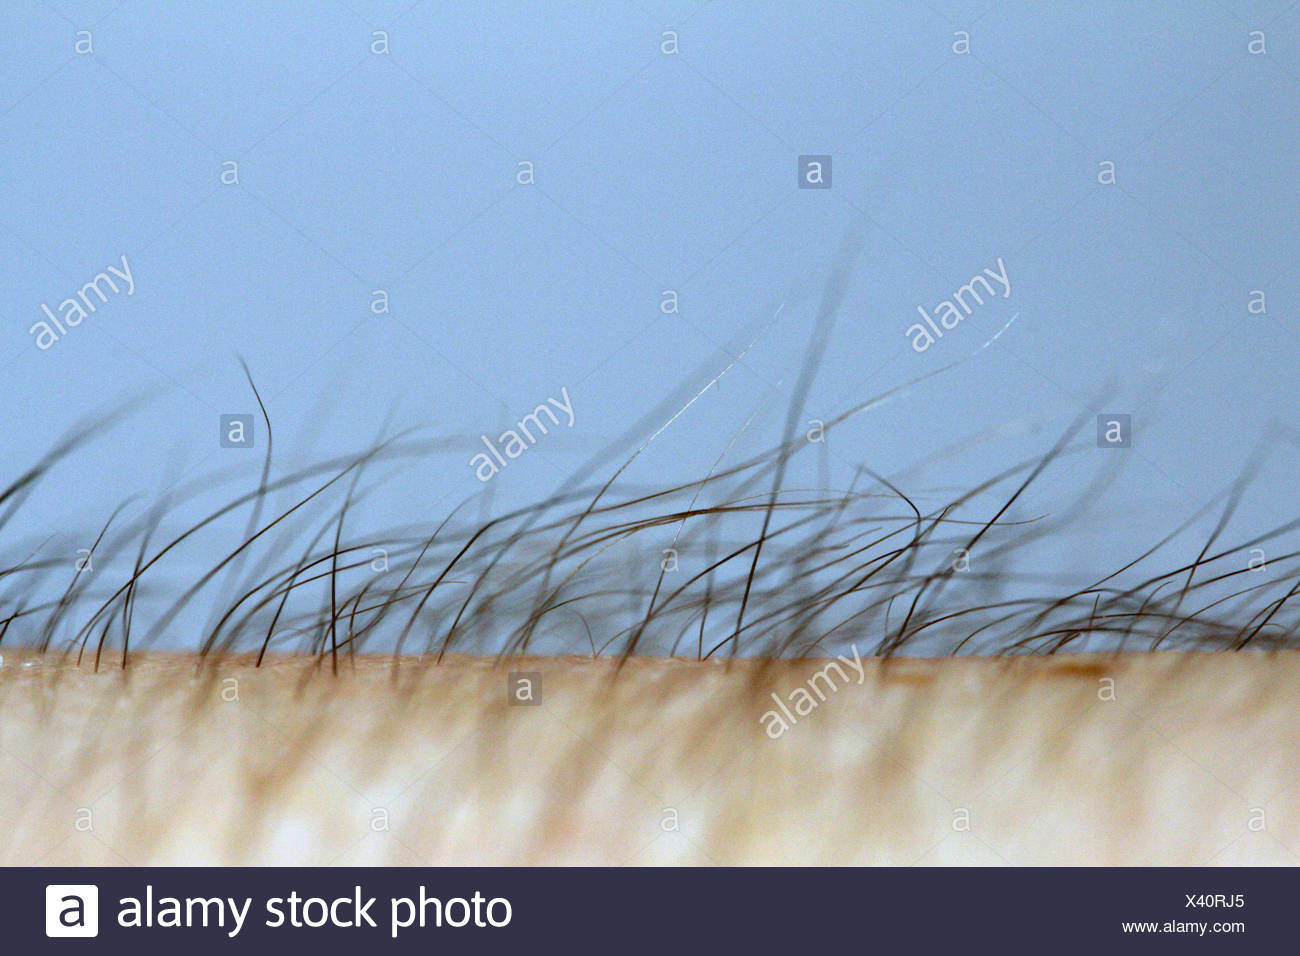 Hairs Standing Up On A Man S Arm Stock Photo Alamy